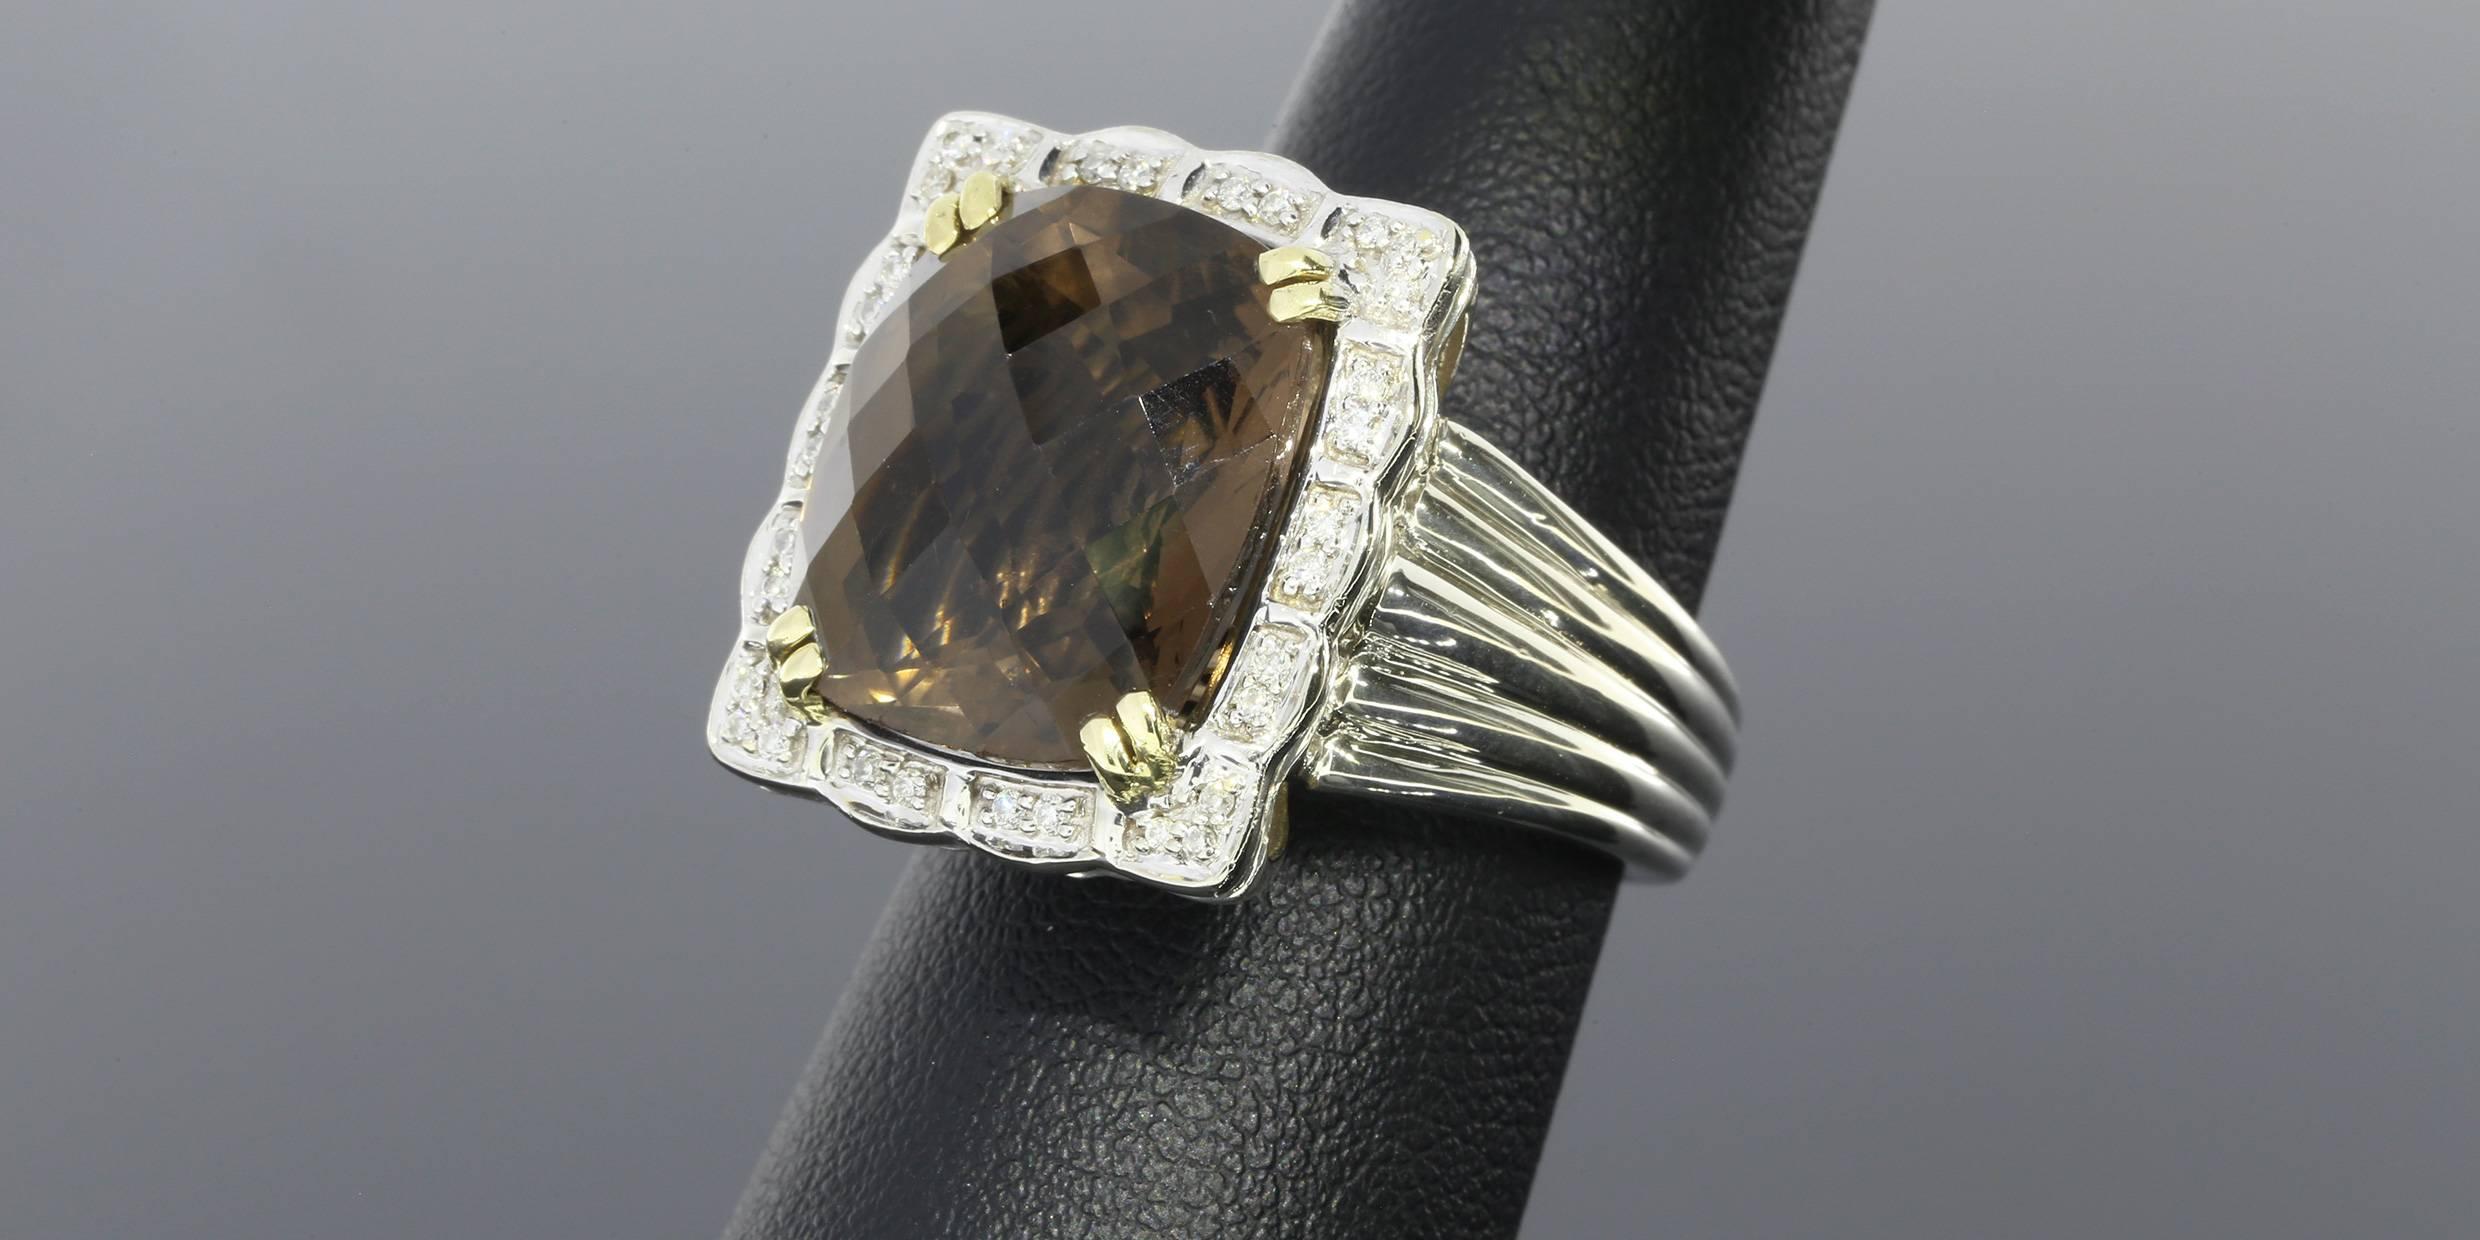 This stunning ring is part of the designer line Charles Krypell. The ring features a smoky quartz center stone as well as round brilliant cut diamonds weighing approximately 0.20CTW. The ring is comprised of sterling silver and 14 karat yellow gold.